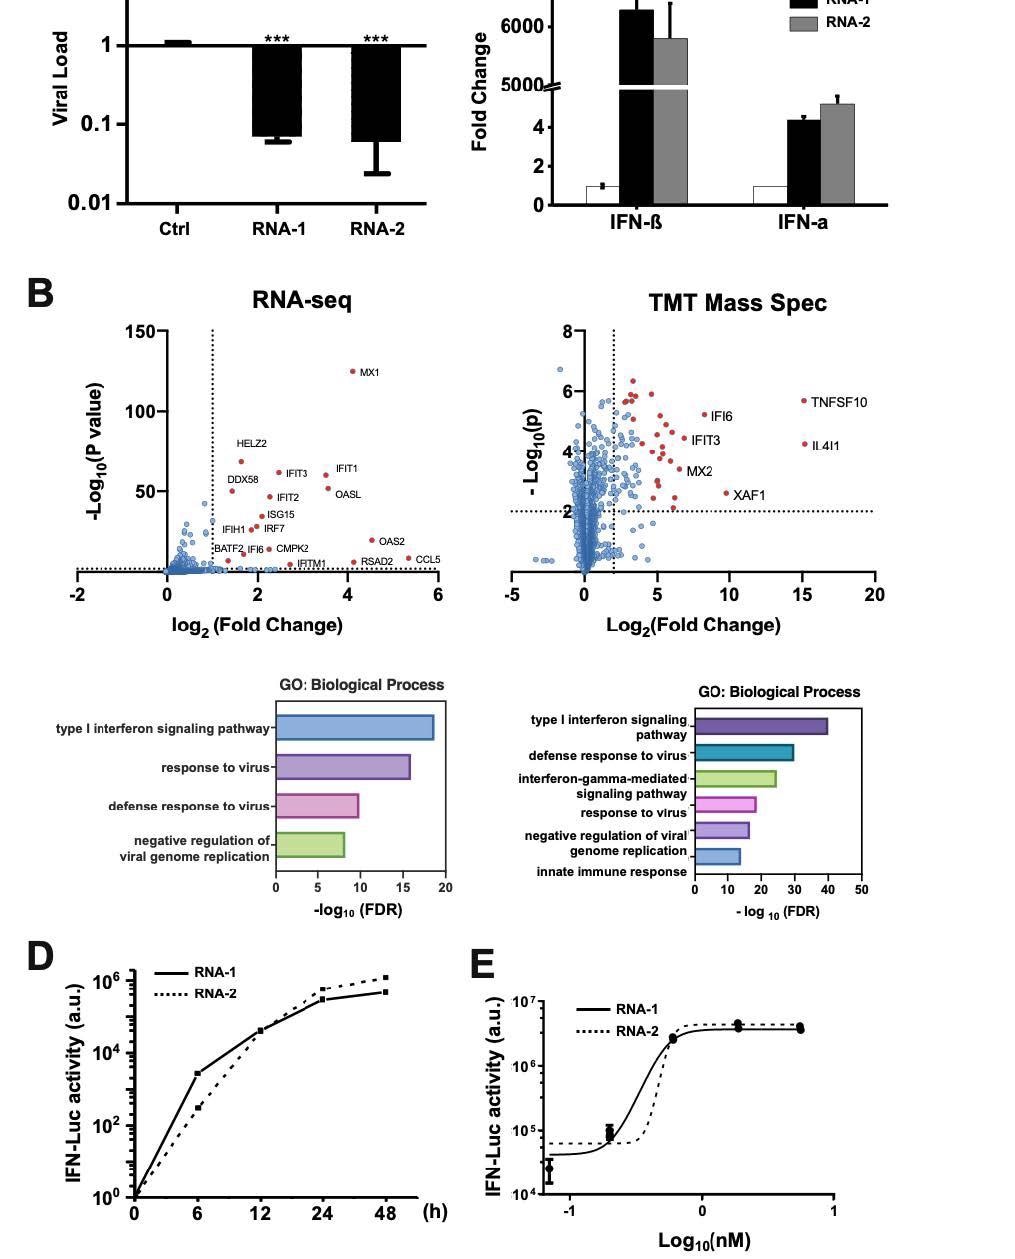 Discovery of new immunostimulatory RNAs. (A) A549 cells were transfected with RNA-1, RNA-2, or a scrambled duplex RNA control, and infected with influenza A/WSN/33 (H1N1) virus (MOI=0.01) 24 hours later. Titers of progeny viruses in medium supernatants collected at 48 h post-infection were determined by quantifying plaque forming units (PFUs); data are shown as % viral infection measured in the cells treated with the control RNA (Data shown are mean ± standard deviation; N =3; ***, p < 0.001). (B) A549 cells were transfected with RNA-1 or a scrambled dsRNA control, collected at 48 h, and analyzed by RNA761 seq (left) or TMT Mass Spec (right). Differentially expressed genes (DEGs) from RNA-seq or proteins from TMT Mass Spec are shown in volcano plots (top) and results of GO Enrichment analysis performed for the DEGs are shown at the bottom (N = 3). (C) qPCR analysis of cellular IFN-β and IFN-α RNA levels at 48 h after A549 cells were transfected with RNA-1, RNA-2, or scrambled dsRNA control (N = 3). (D) RNA-mediated production kinetics of IFN production in wild-type A549-Dual cells that were transfected with RNA-1, RNA-2, or scramble RNA control measured using a Quanti-Luc assay. OD values from cells transfected with the scrambled RNA control were subtracted as background (N = 6). (E) Dose-dependent induction of IFN by RNA-1 and -2 in A549-Dual cells compared to scrambled RNA control measured at 48 h post770 transfection (control OD values were subtracted as background; N = 6).